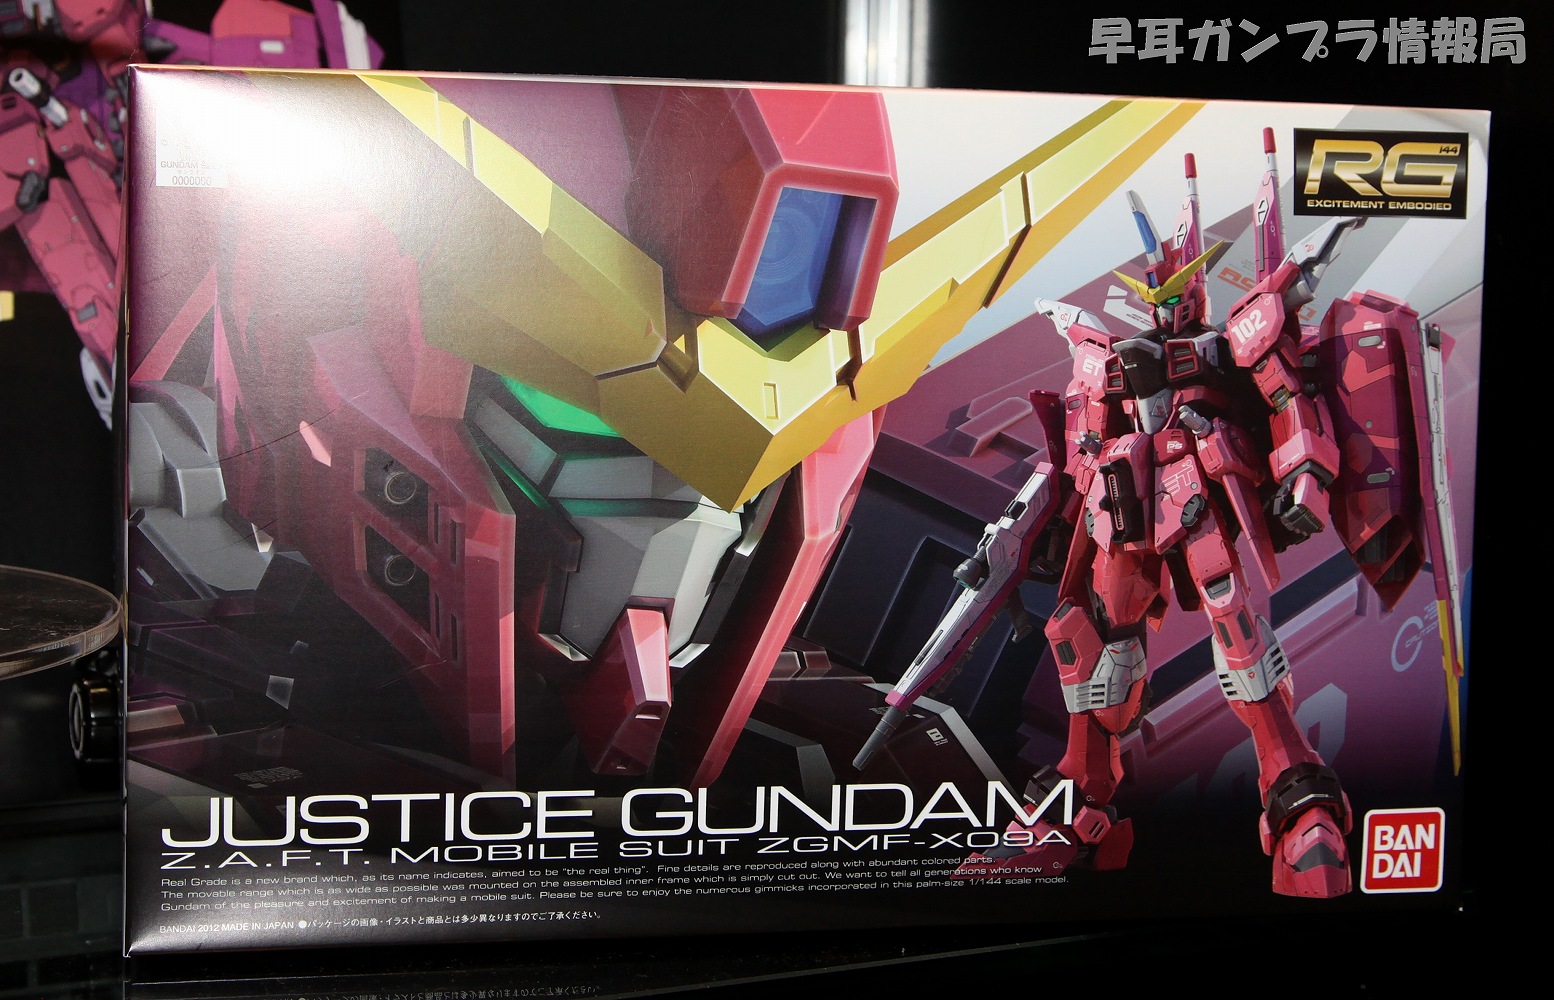 Rg 1 144 Zgmf X09a Justice Gundam Others New Photoreview With No 11 Wallpaper Size Images Info Links Gunjap